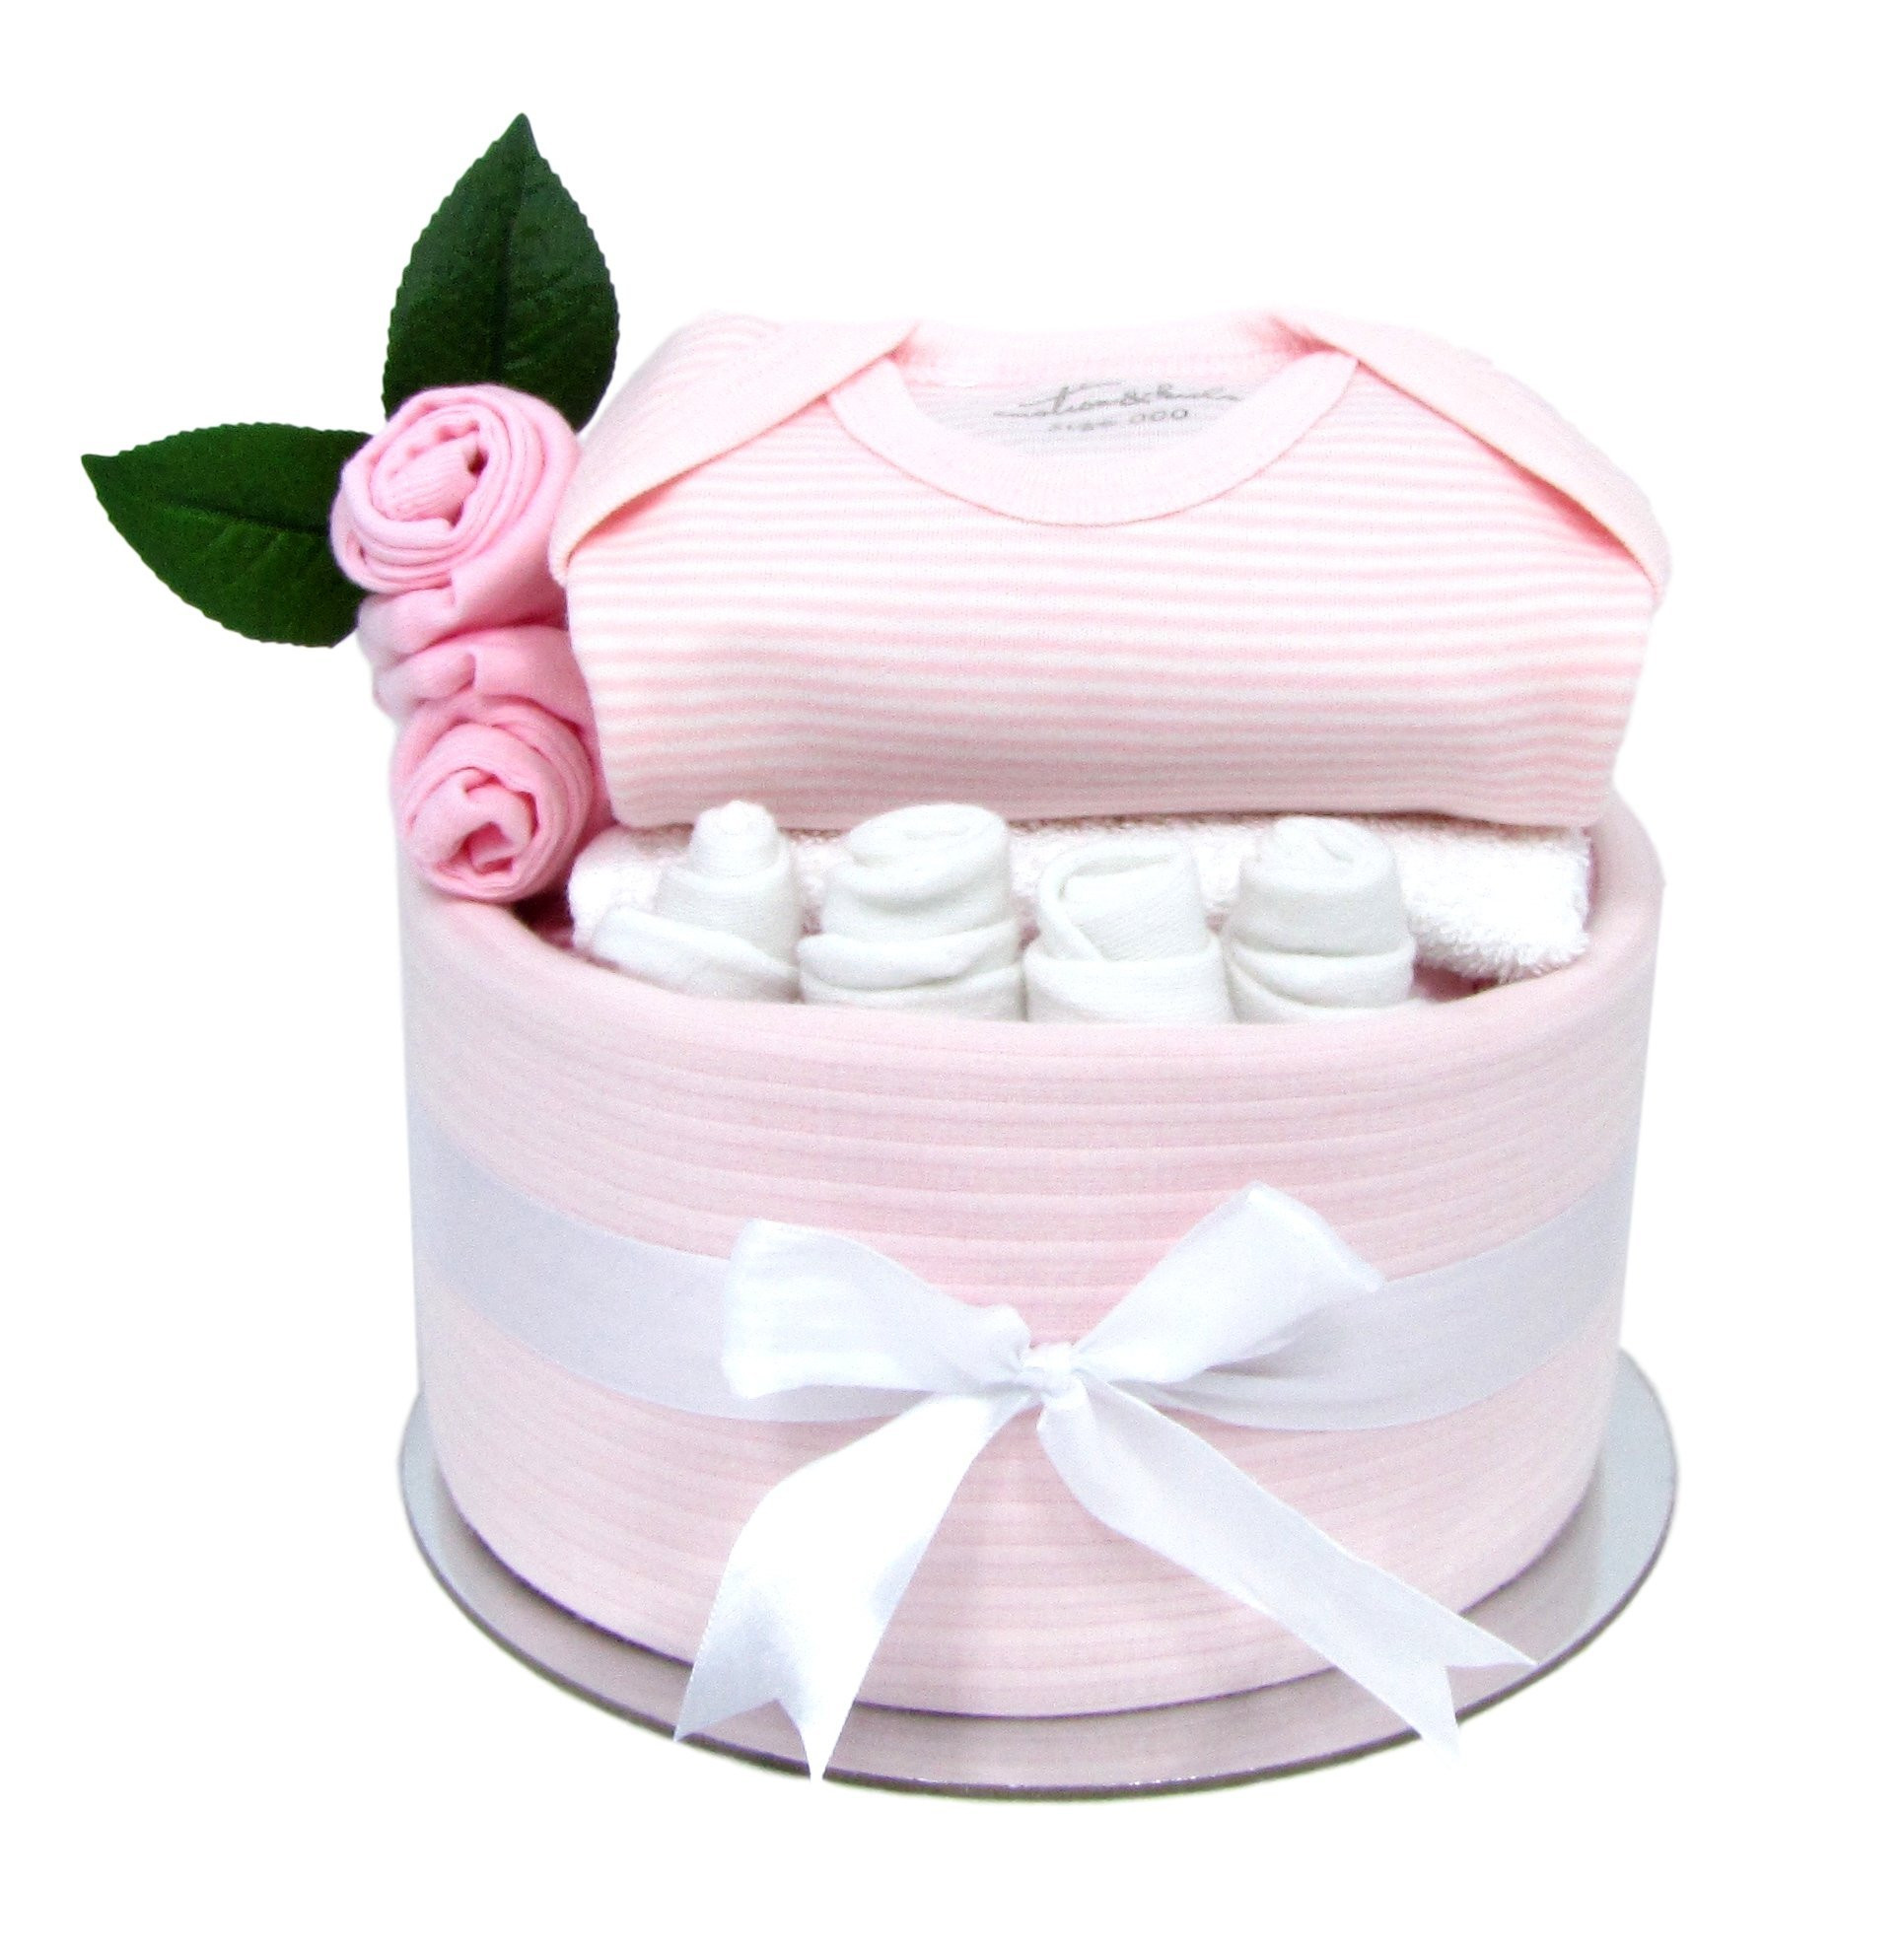 Born Baby Gift Ideas
 Baby Girl Essentials Nappy Cake